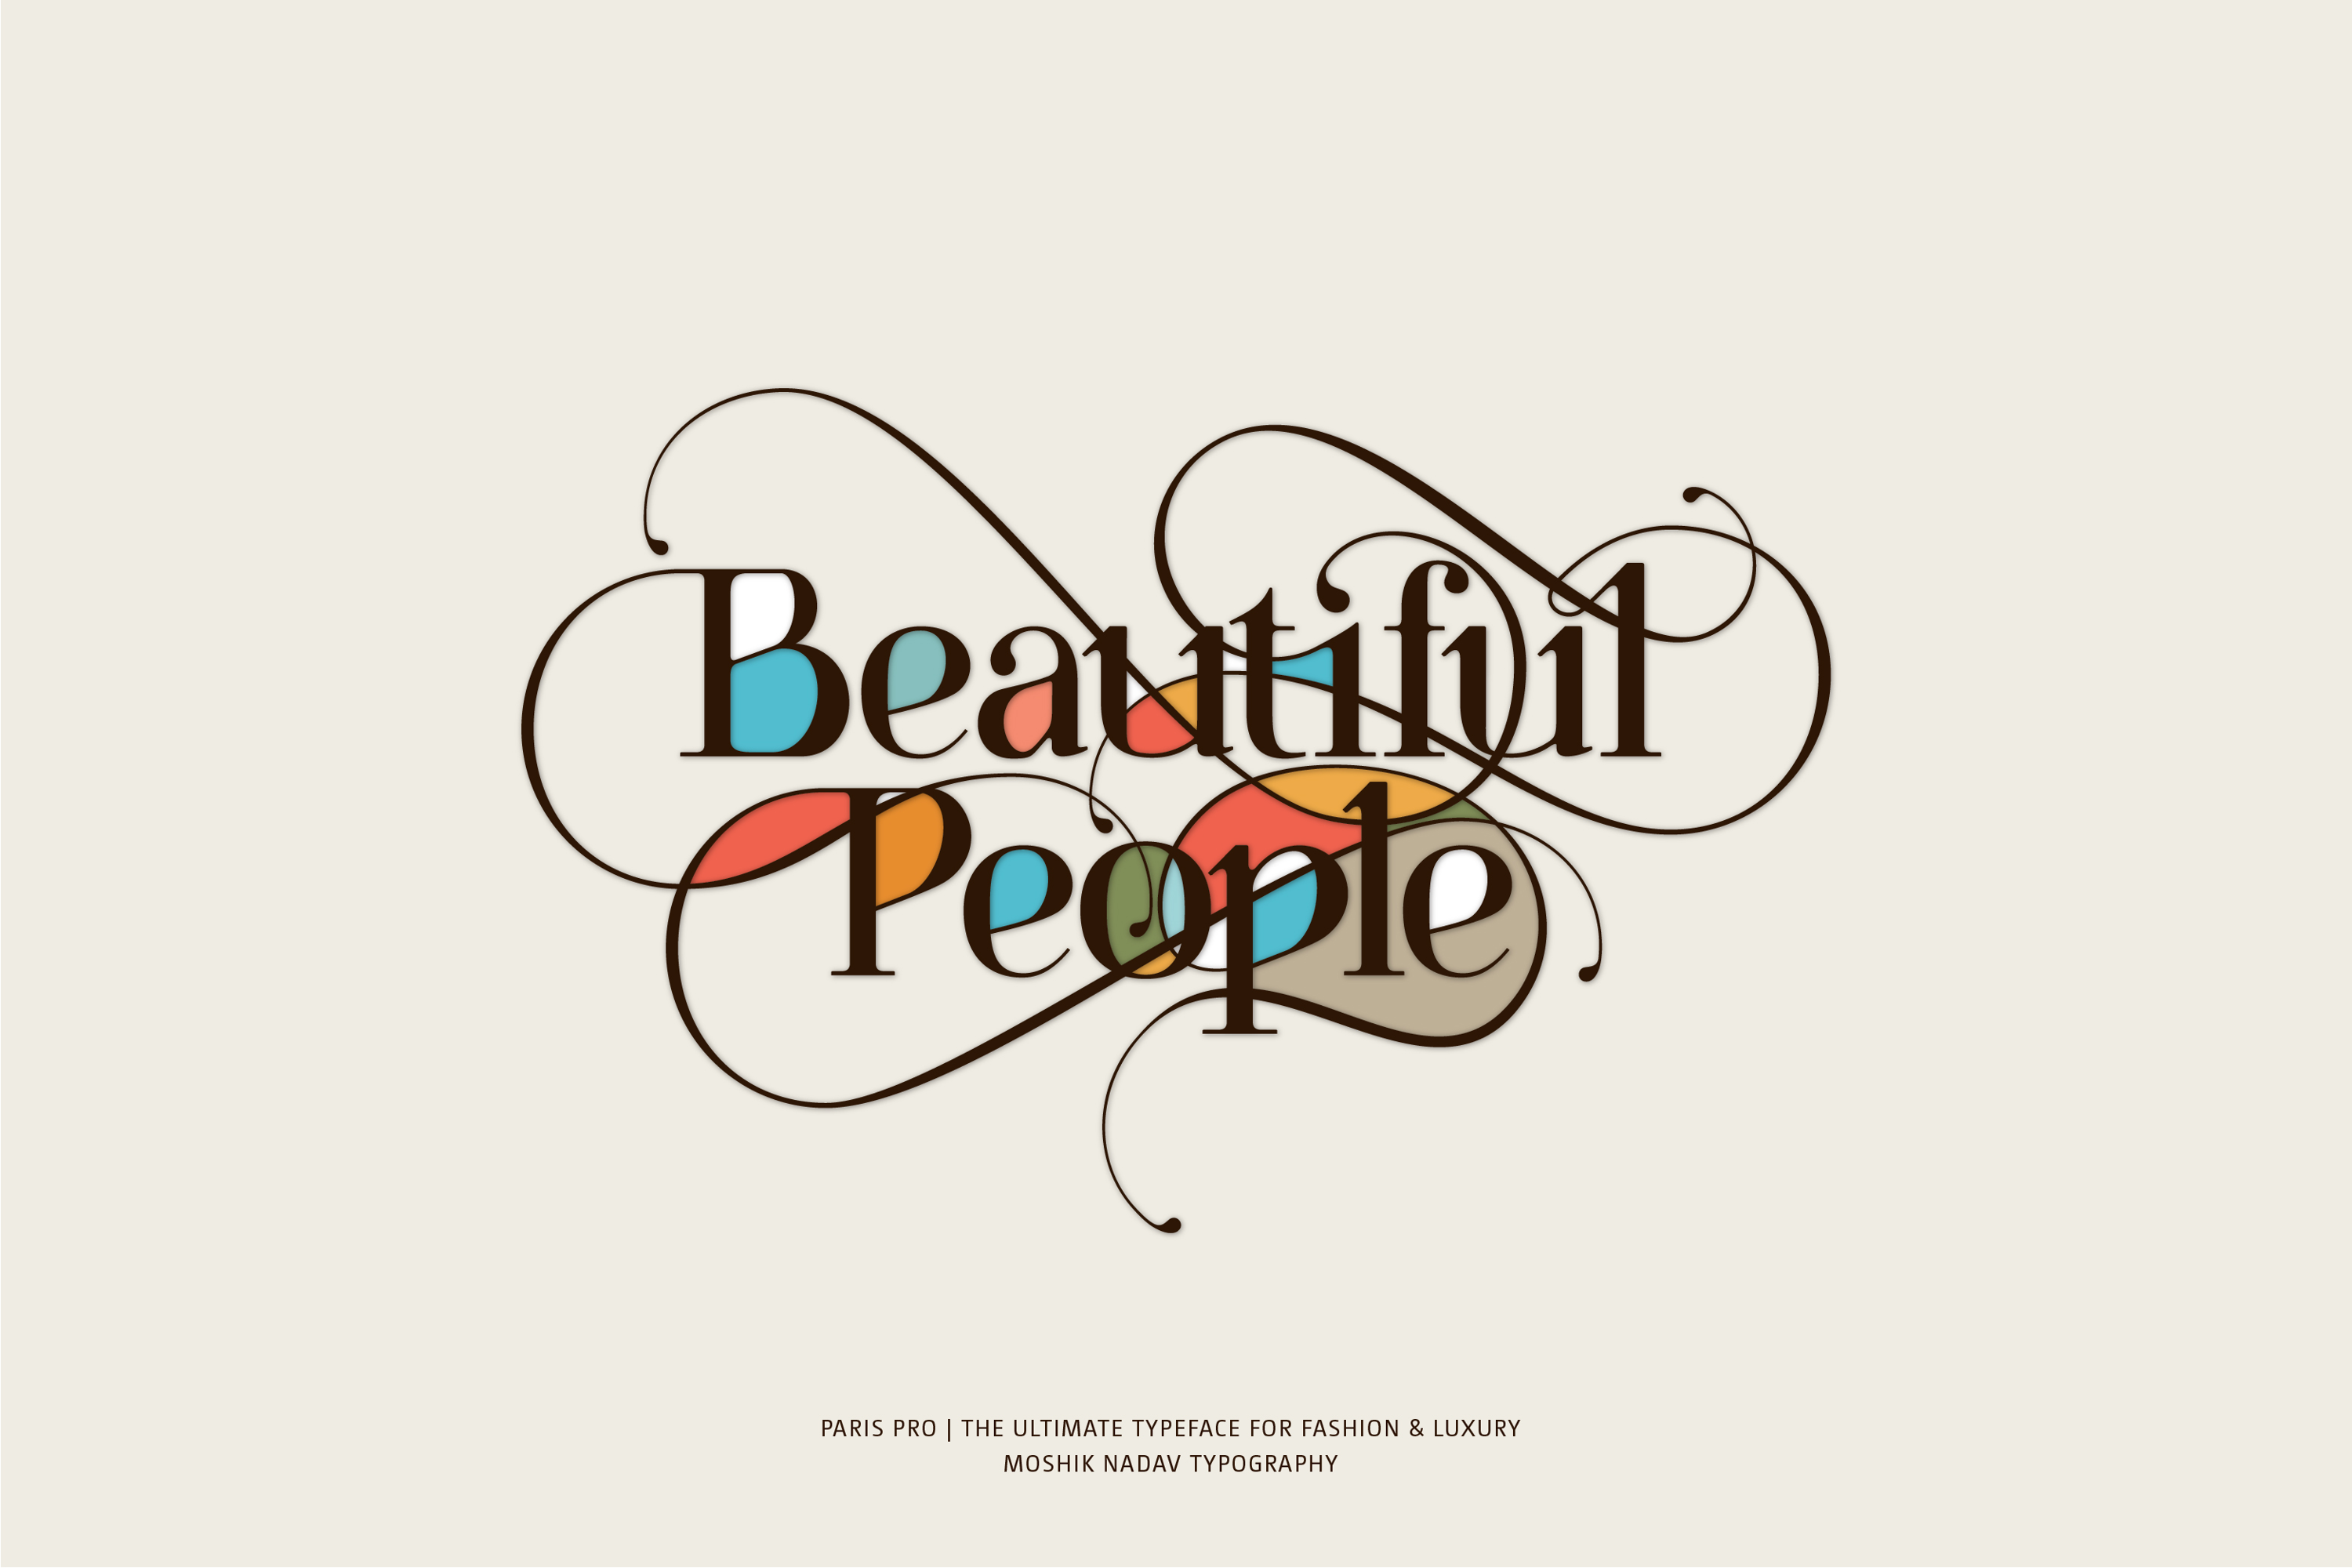 Beautiful people Typography, Paris Pro Typeface, Sexy fonts, GQ fonts, Fashion magazines fonts, Best logo fonts, Typographer NYC, Sexy typeface, Sexy Typography, Branding fonts, Branding typography, Moshik Nadav